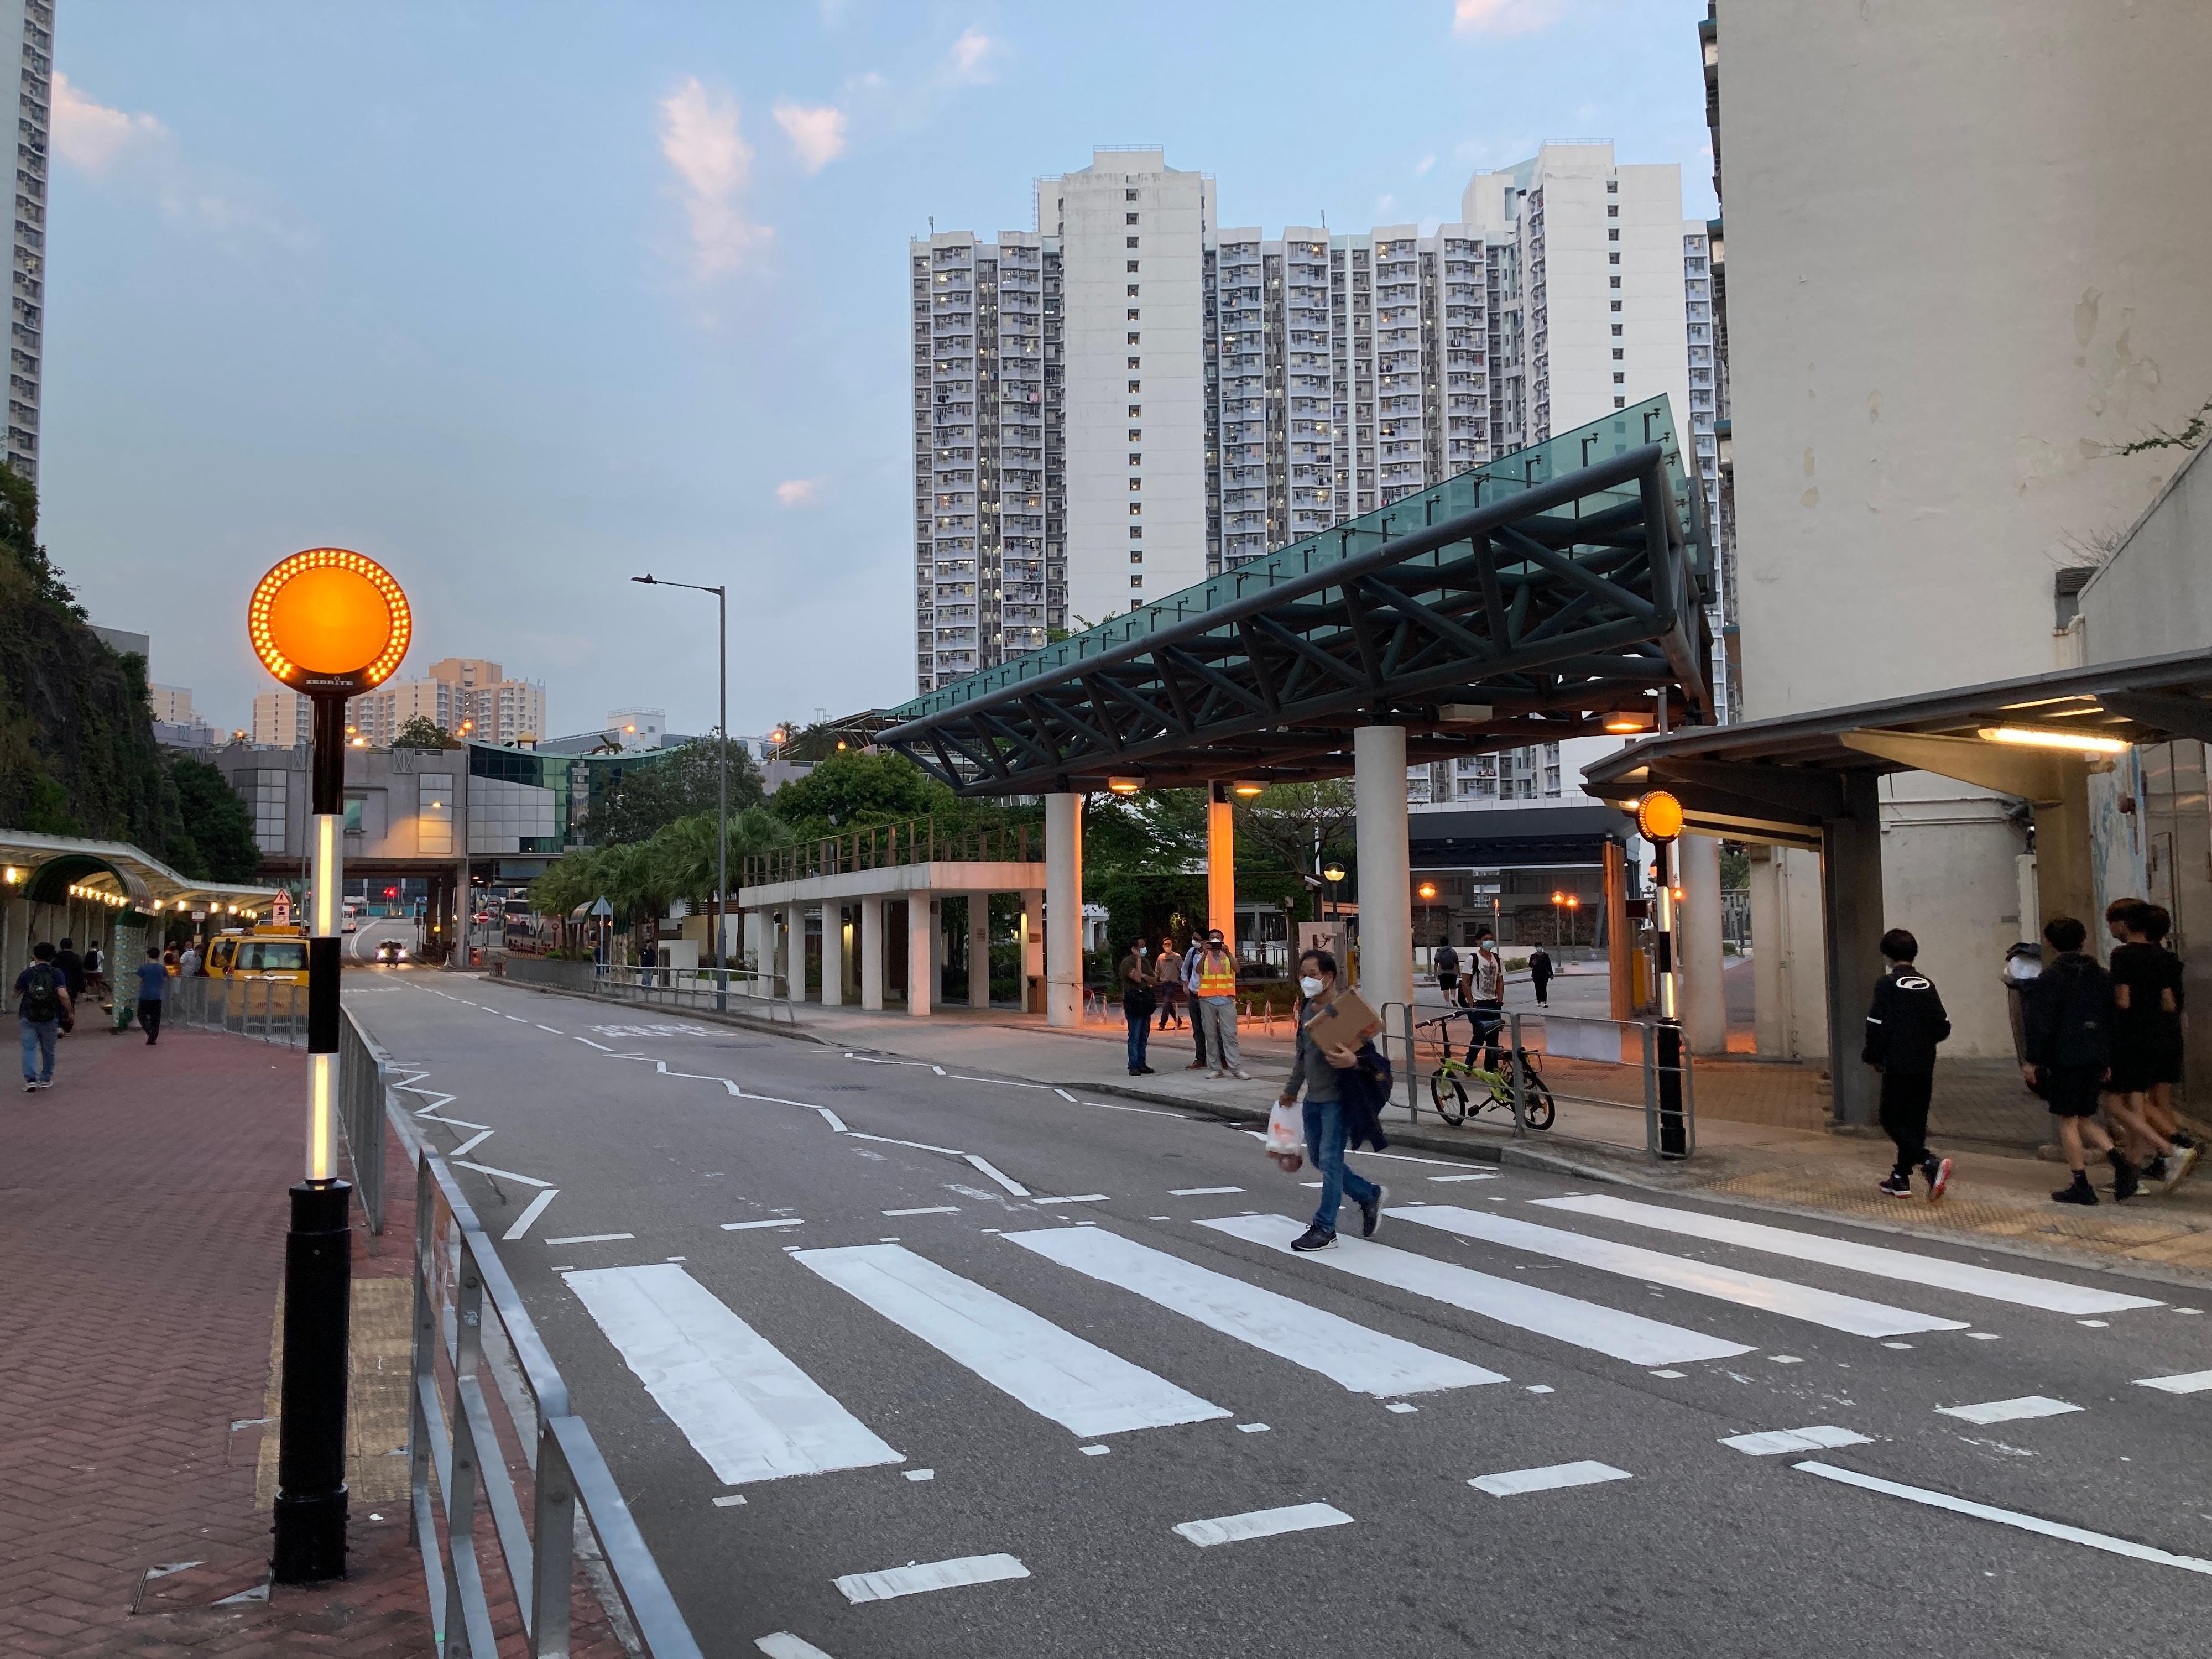 The Transport Department has launched a trial scheme to enhance zebra crossing facilities which aims to remind motorists to stop and give way to pedestrians by making the zebra crossings more conspicuous. Photo shows new Belisha beacons installed at a zebra crossing on Kwai Luen Road in Kwai Tsing District. The new beacons, with a halo of flashing yellow light and a post with flashing white bands, are more visible. 